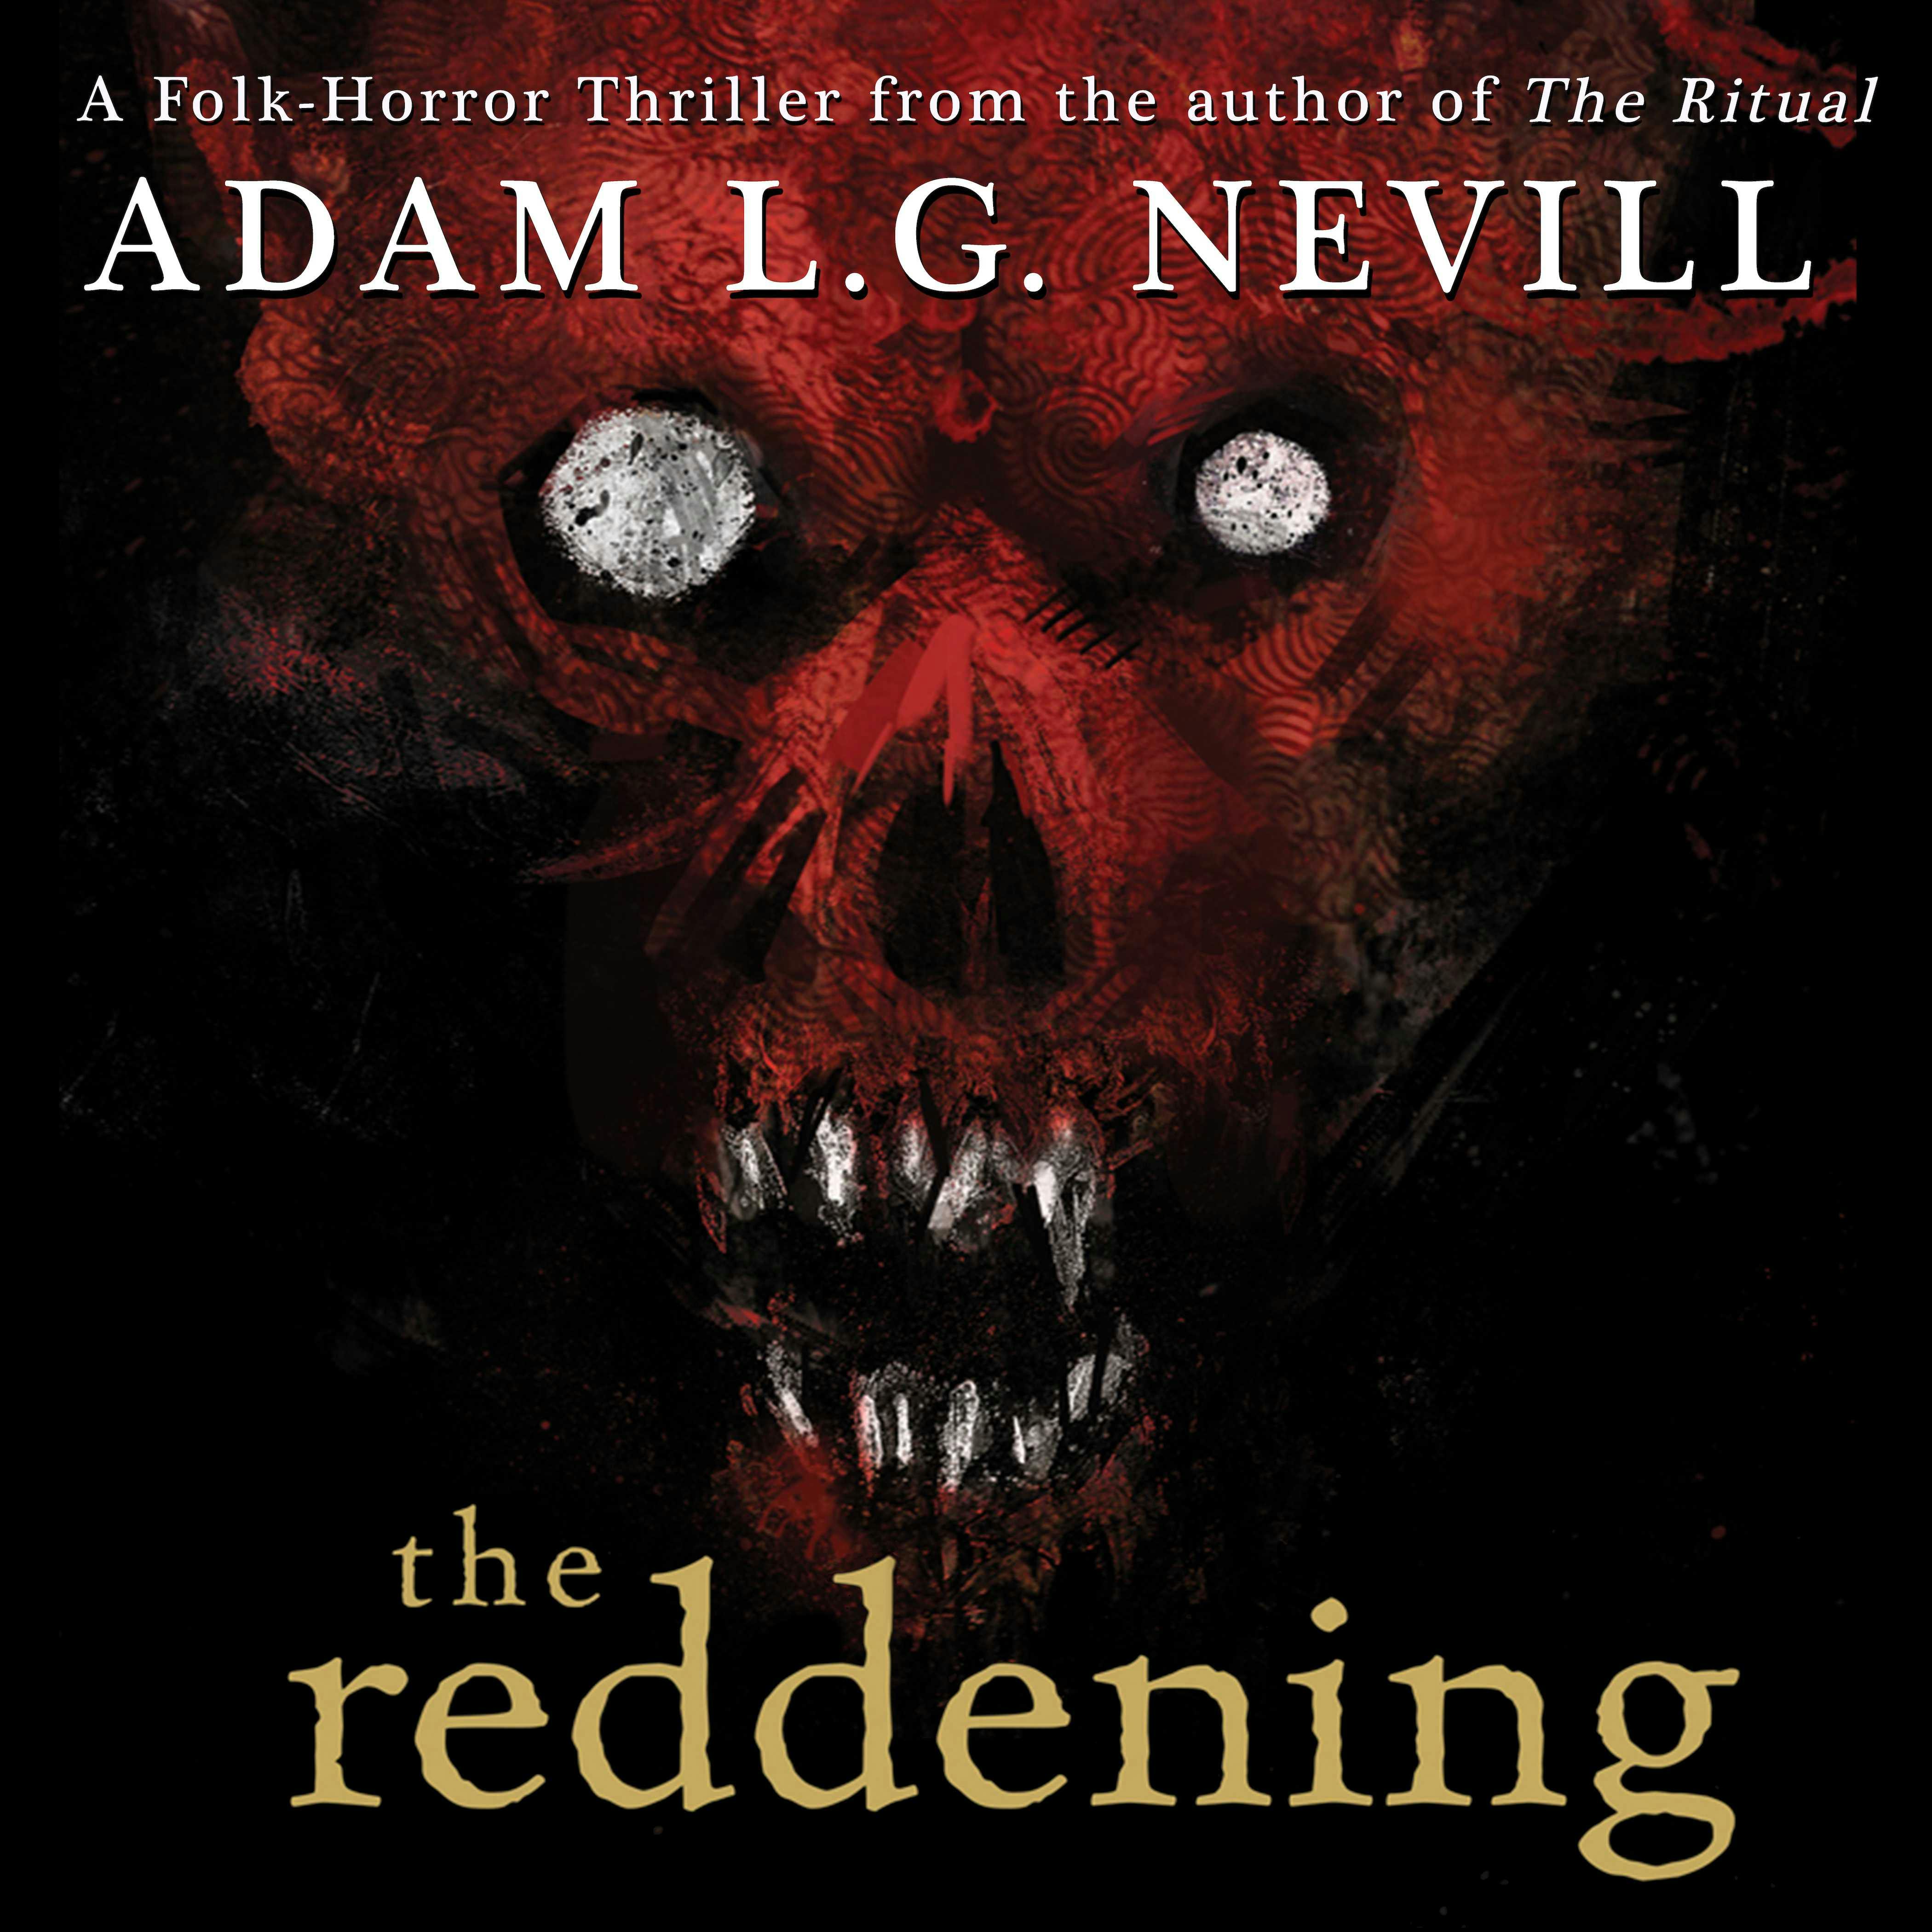 The Reddening: A Gripping Folk-Horror Thriller from the Author of The Ritual. - Adam L.G. Nevill